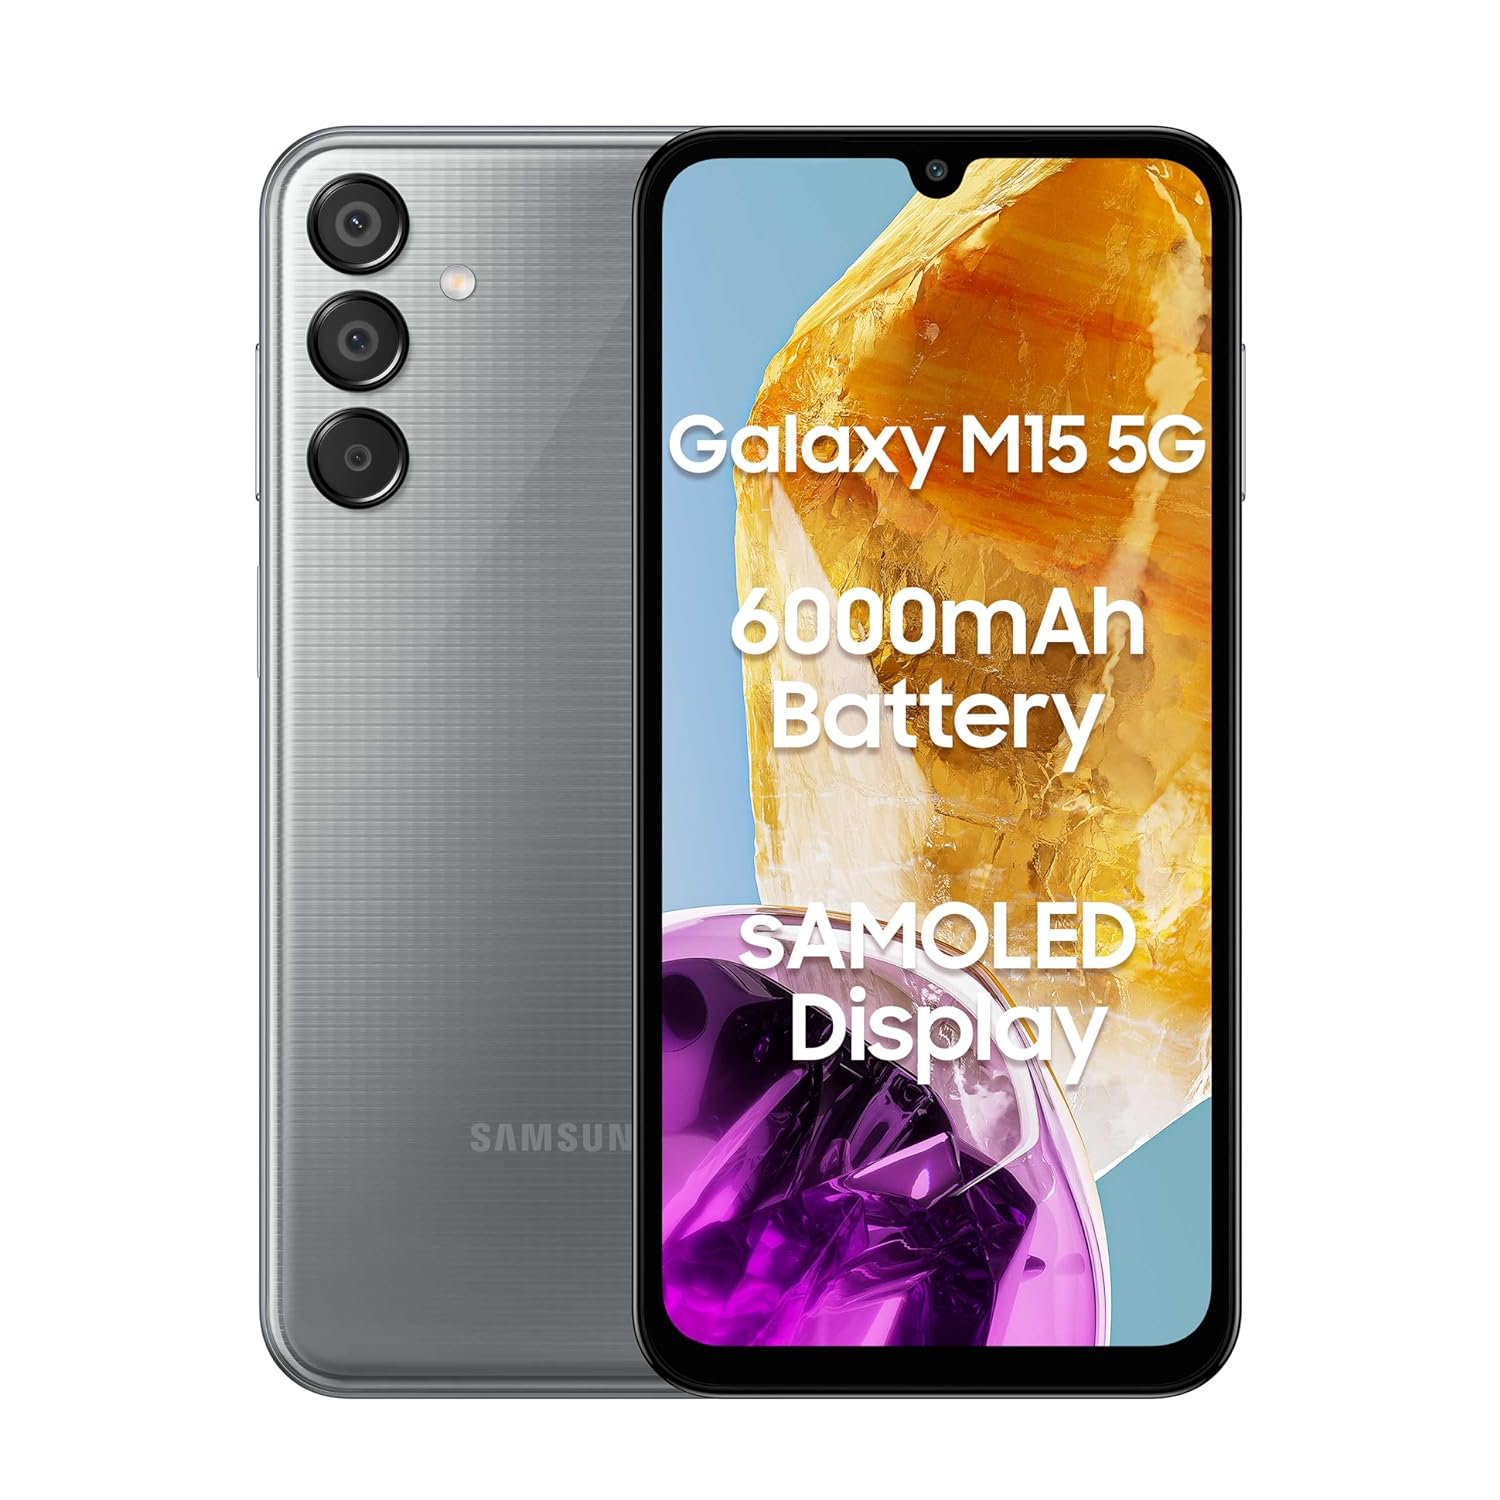 Samsung Galaxy M15 5G Stone Grey6GB RAM128GB Storage 50MP Triple Cam 6000mAh Battery MediaTek Dimensity 6100 4 Gen OS Upgrade  5 Year Security Update Super AMOLED Display Without Charger Samsung Mobile